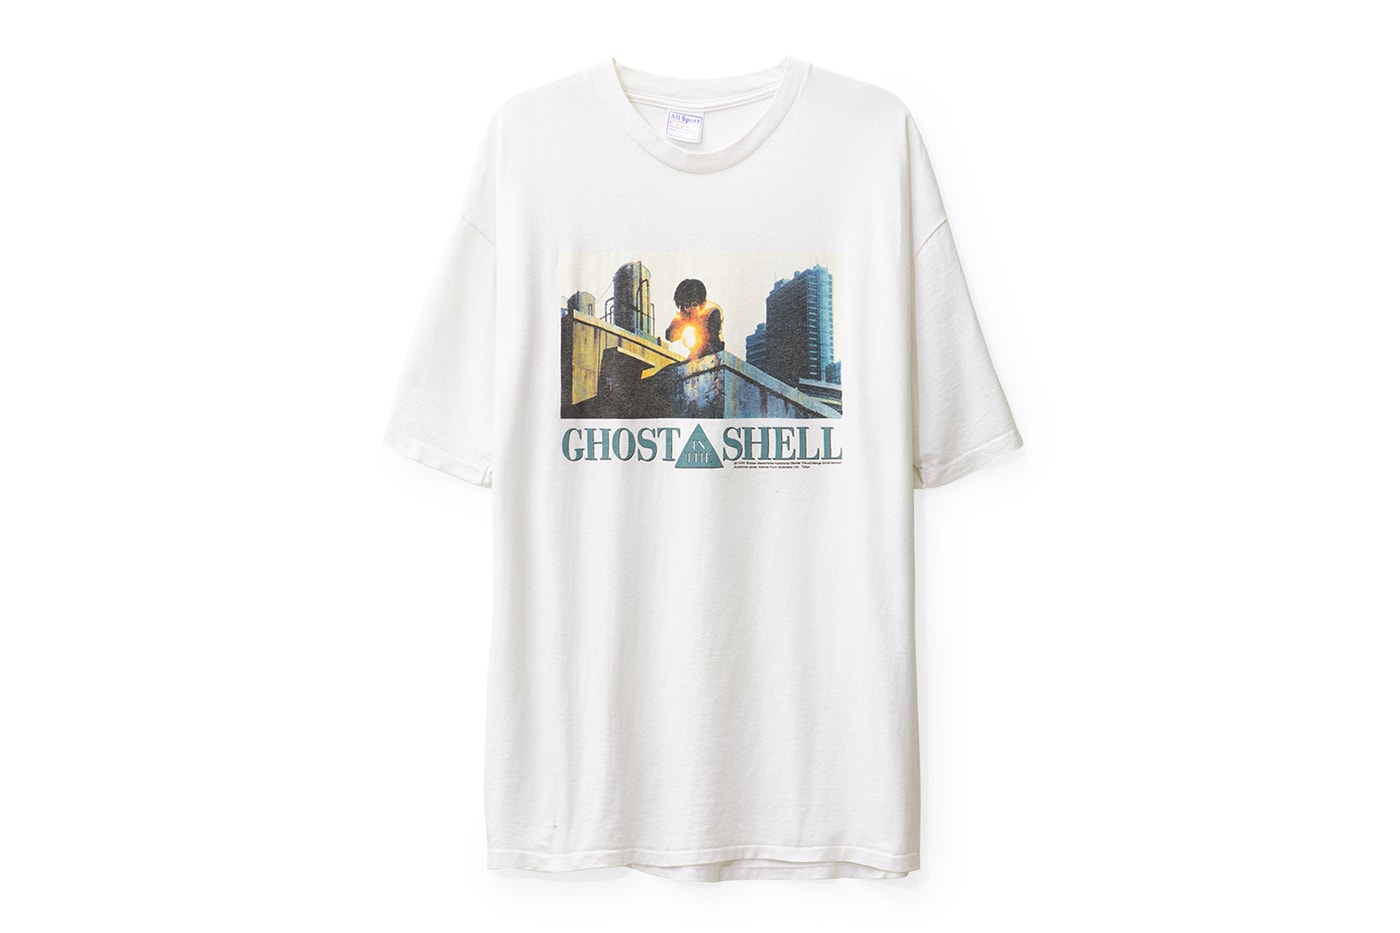 HBX Archives Week 16 Sonic Youth Akira Ghost in the Shell